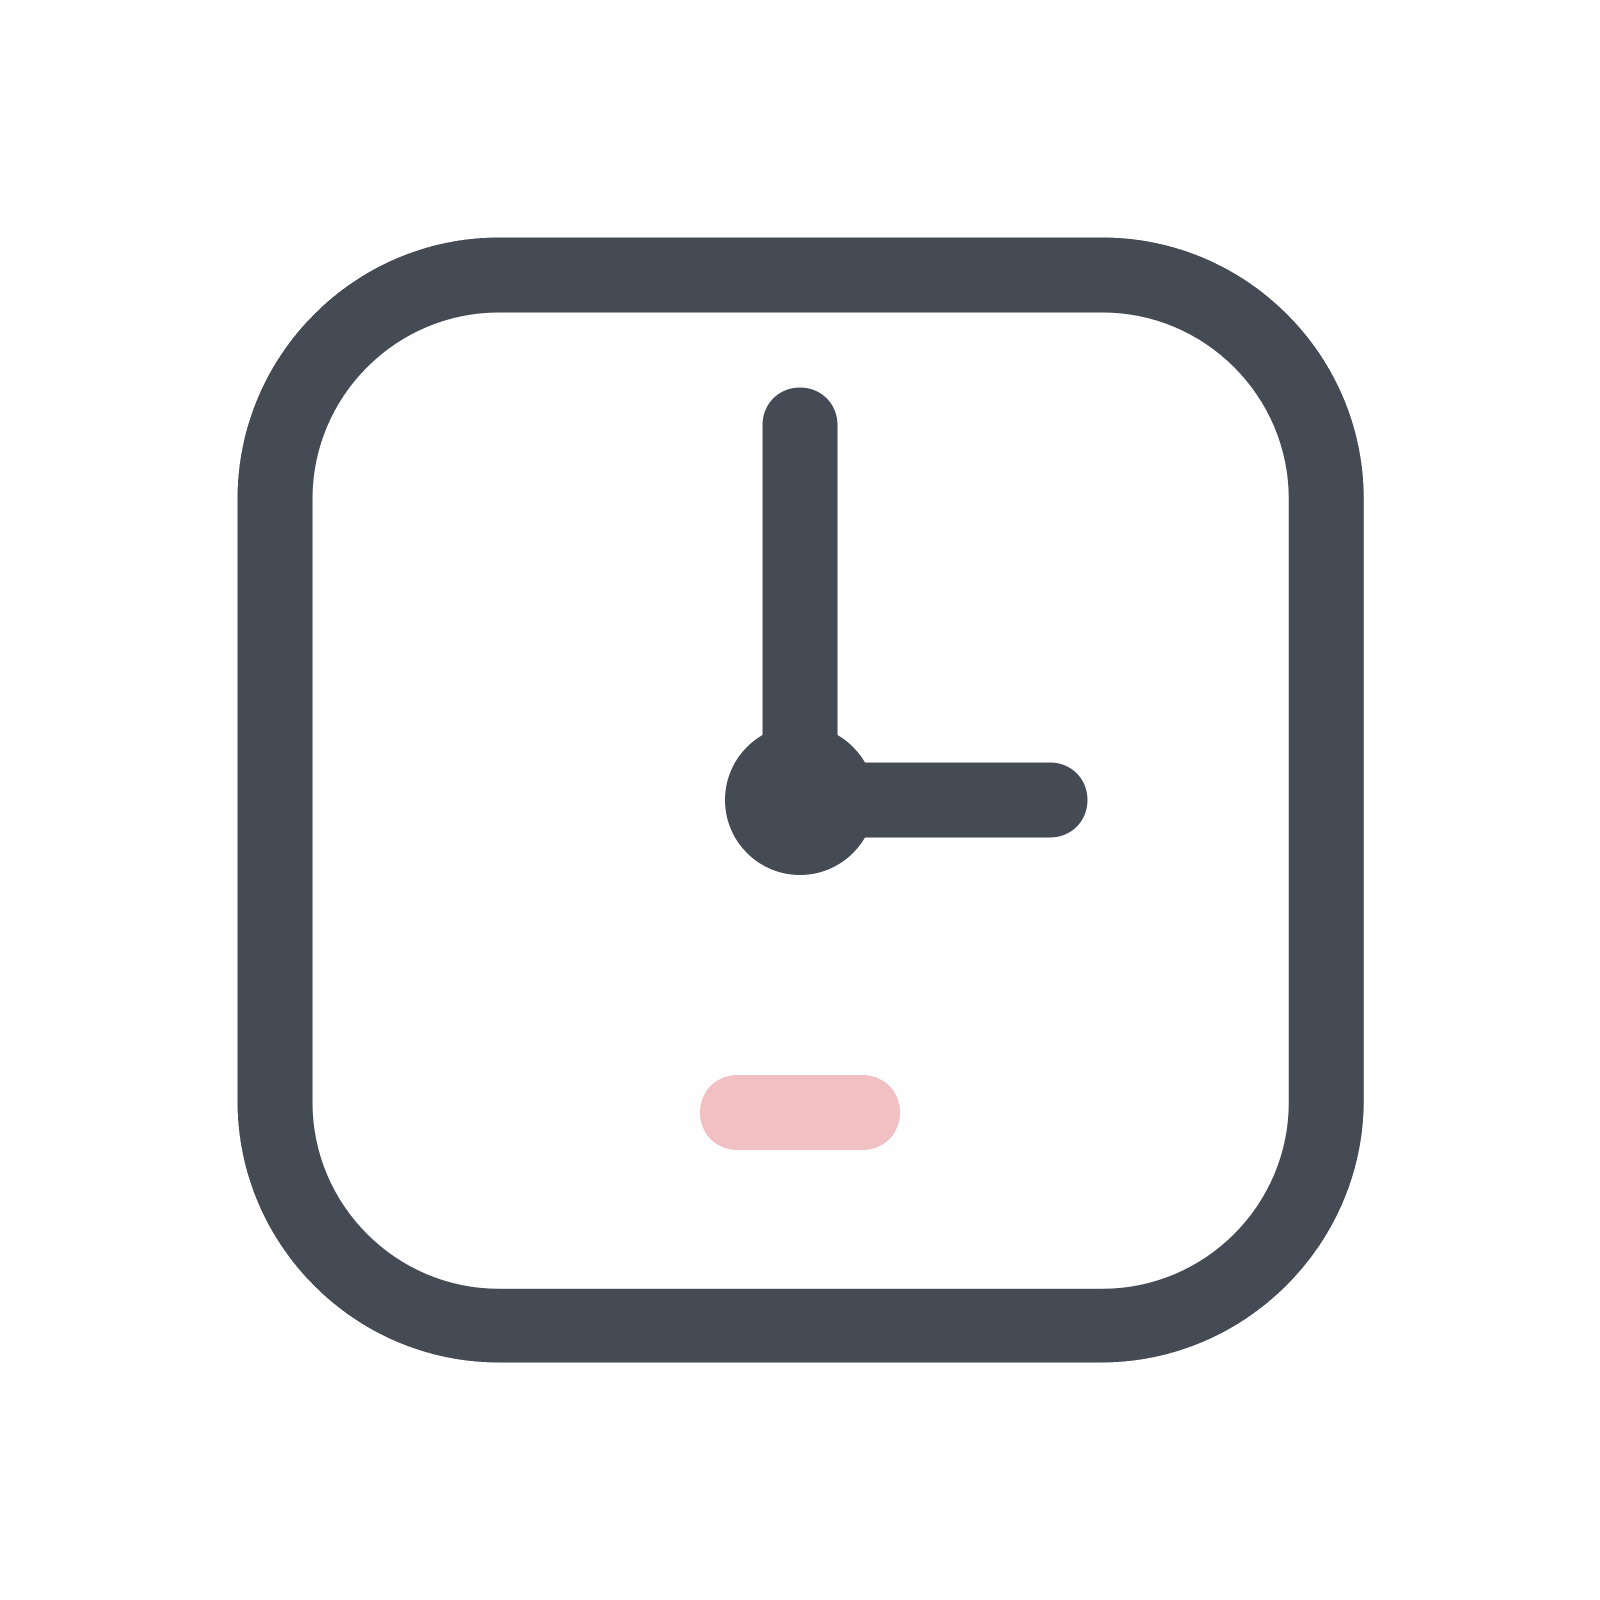 File:Clock simple.svg - Wikimedia Commons